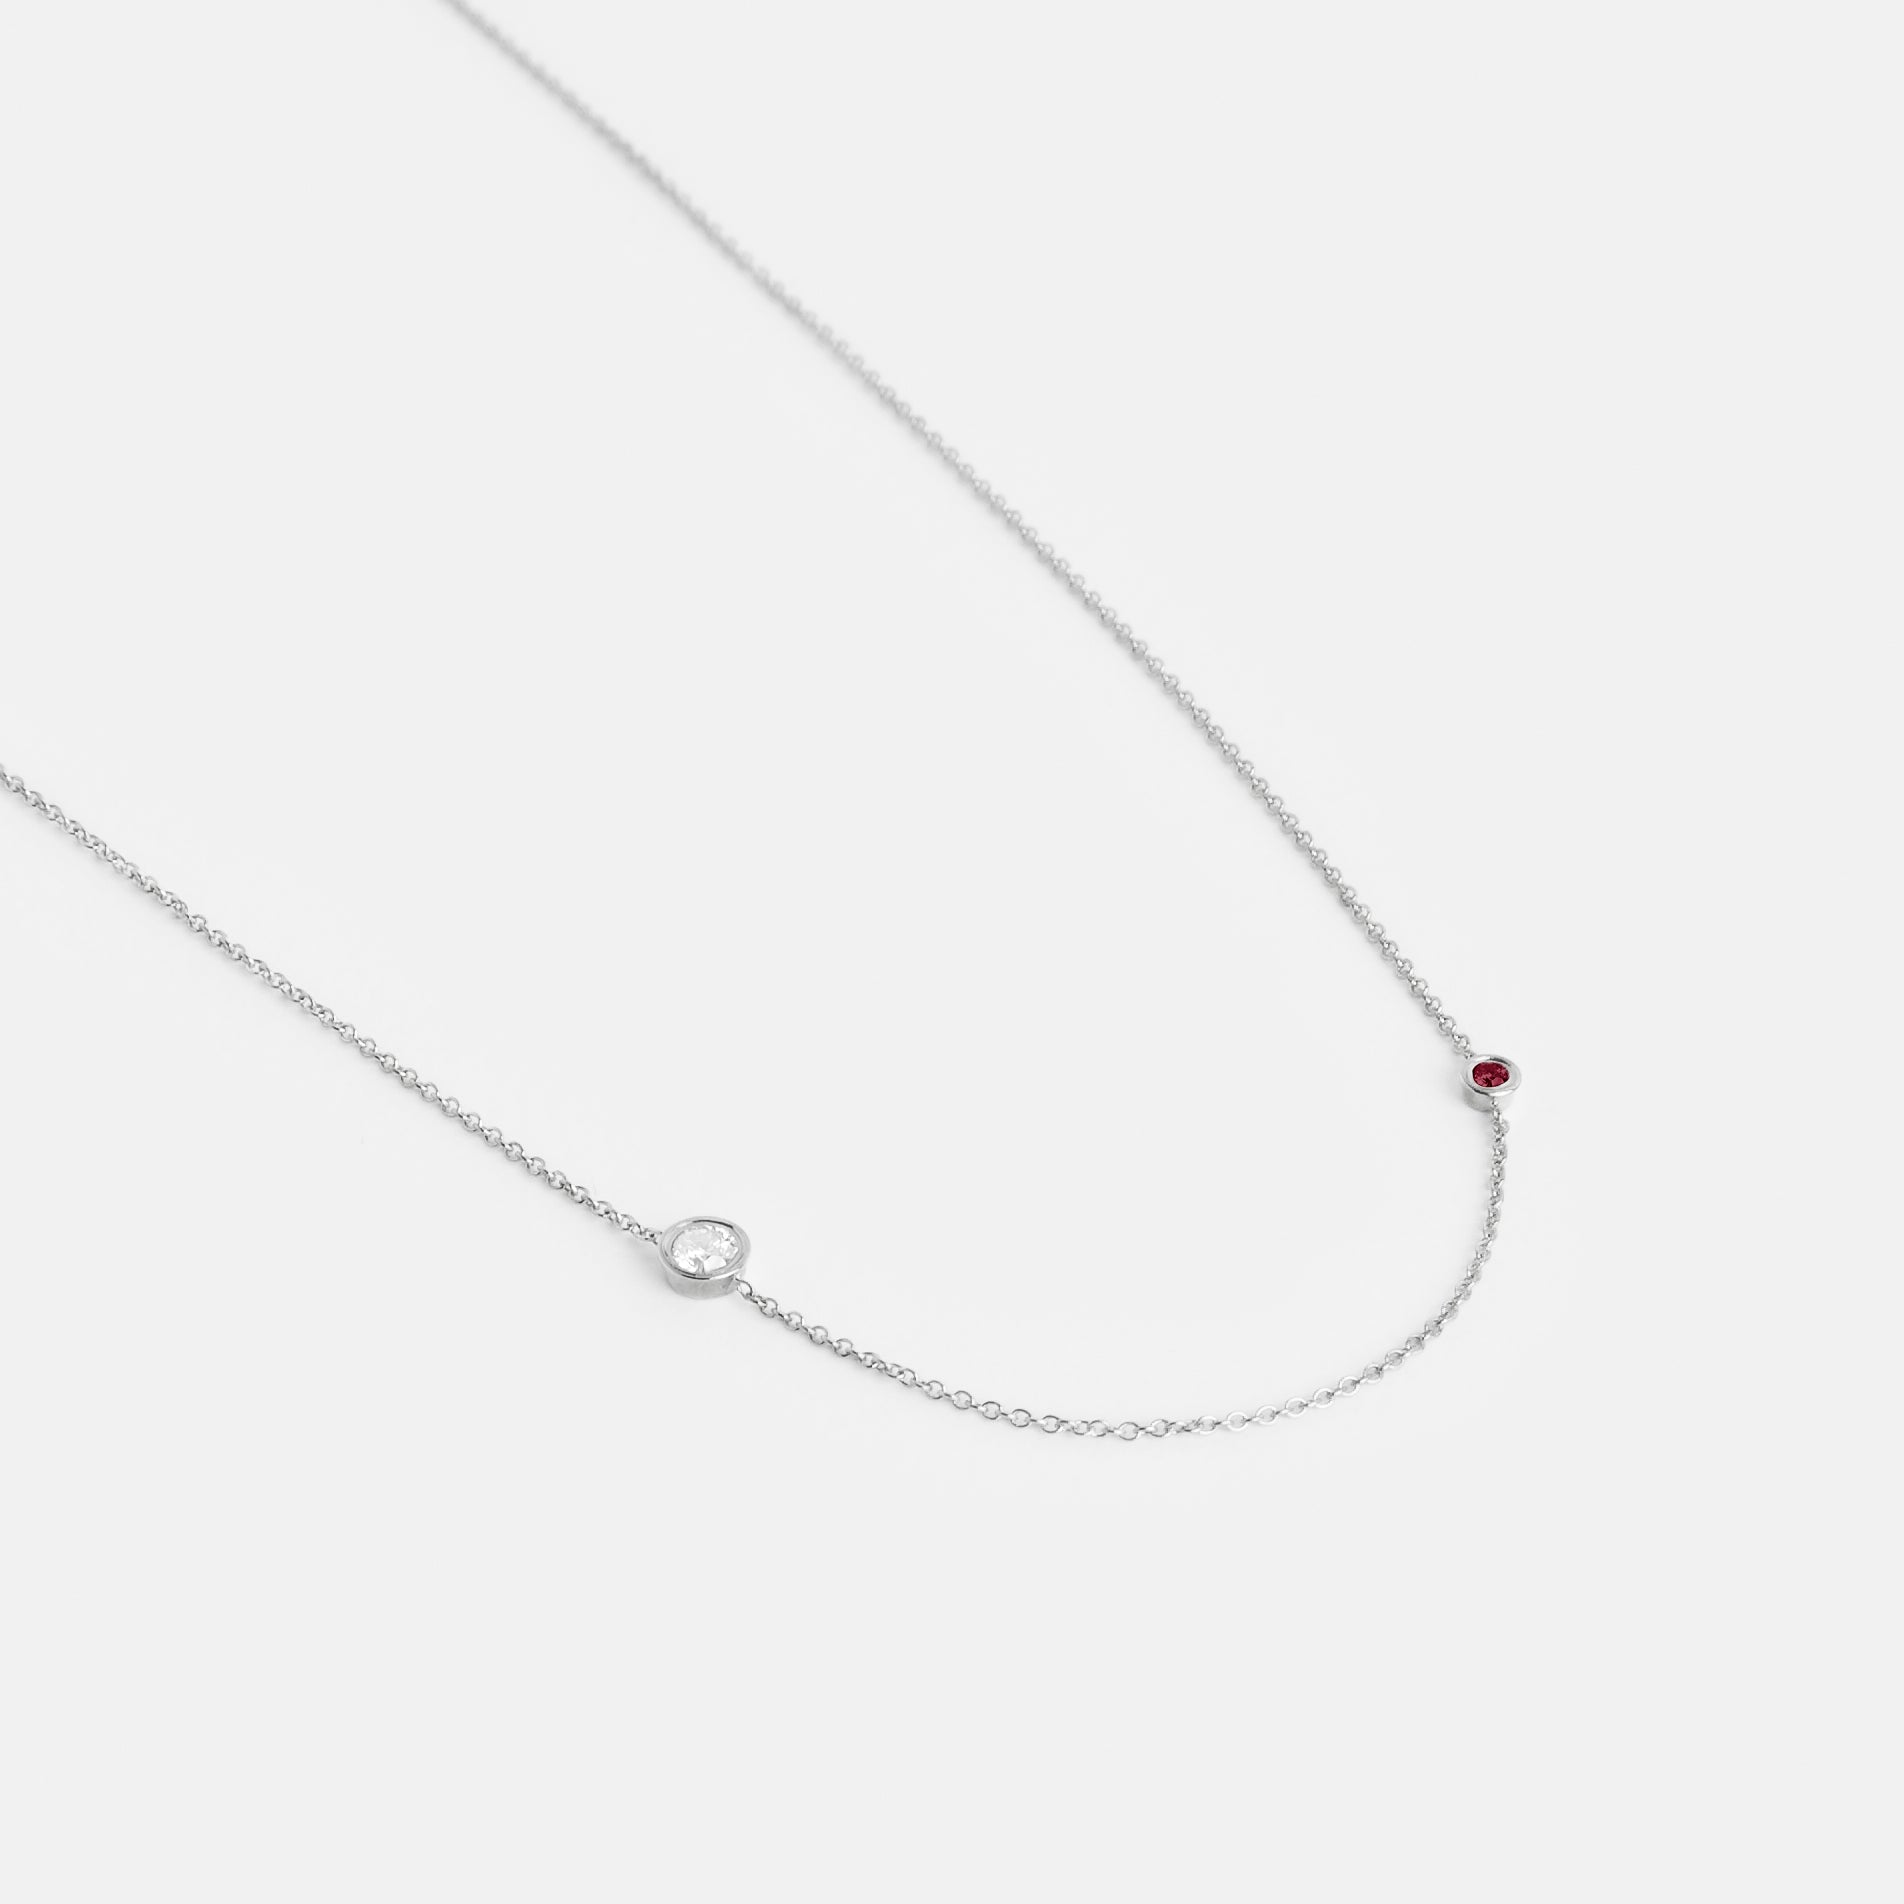 Iba Alternative Necklace in Sterling Silver set with White Diamond and Ruby By SHW Fine Jewelry NYC